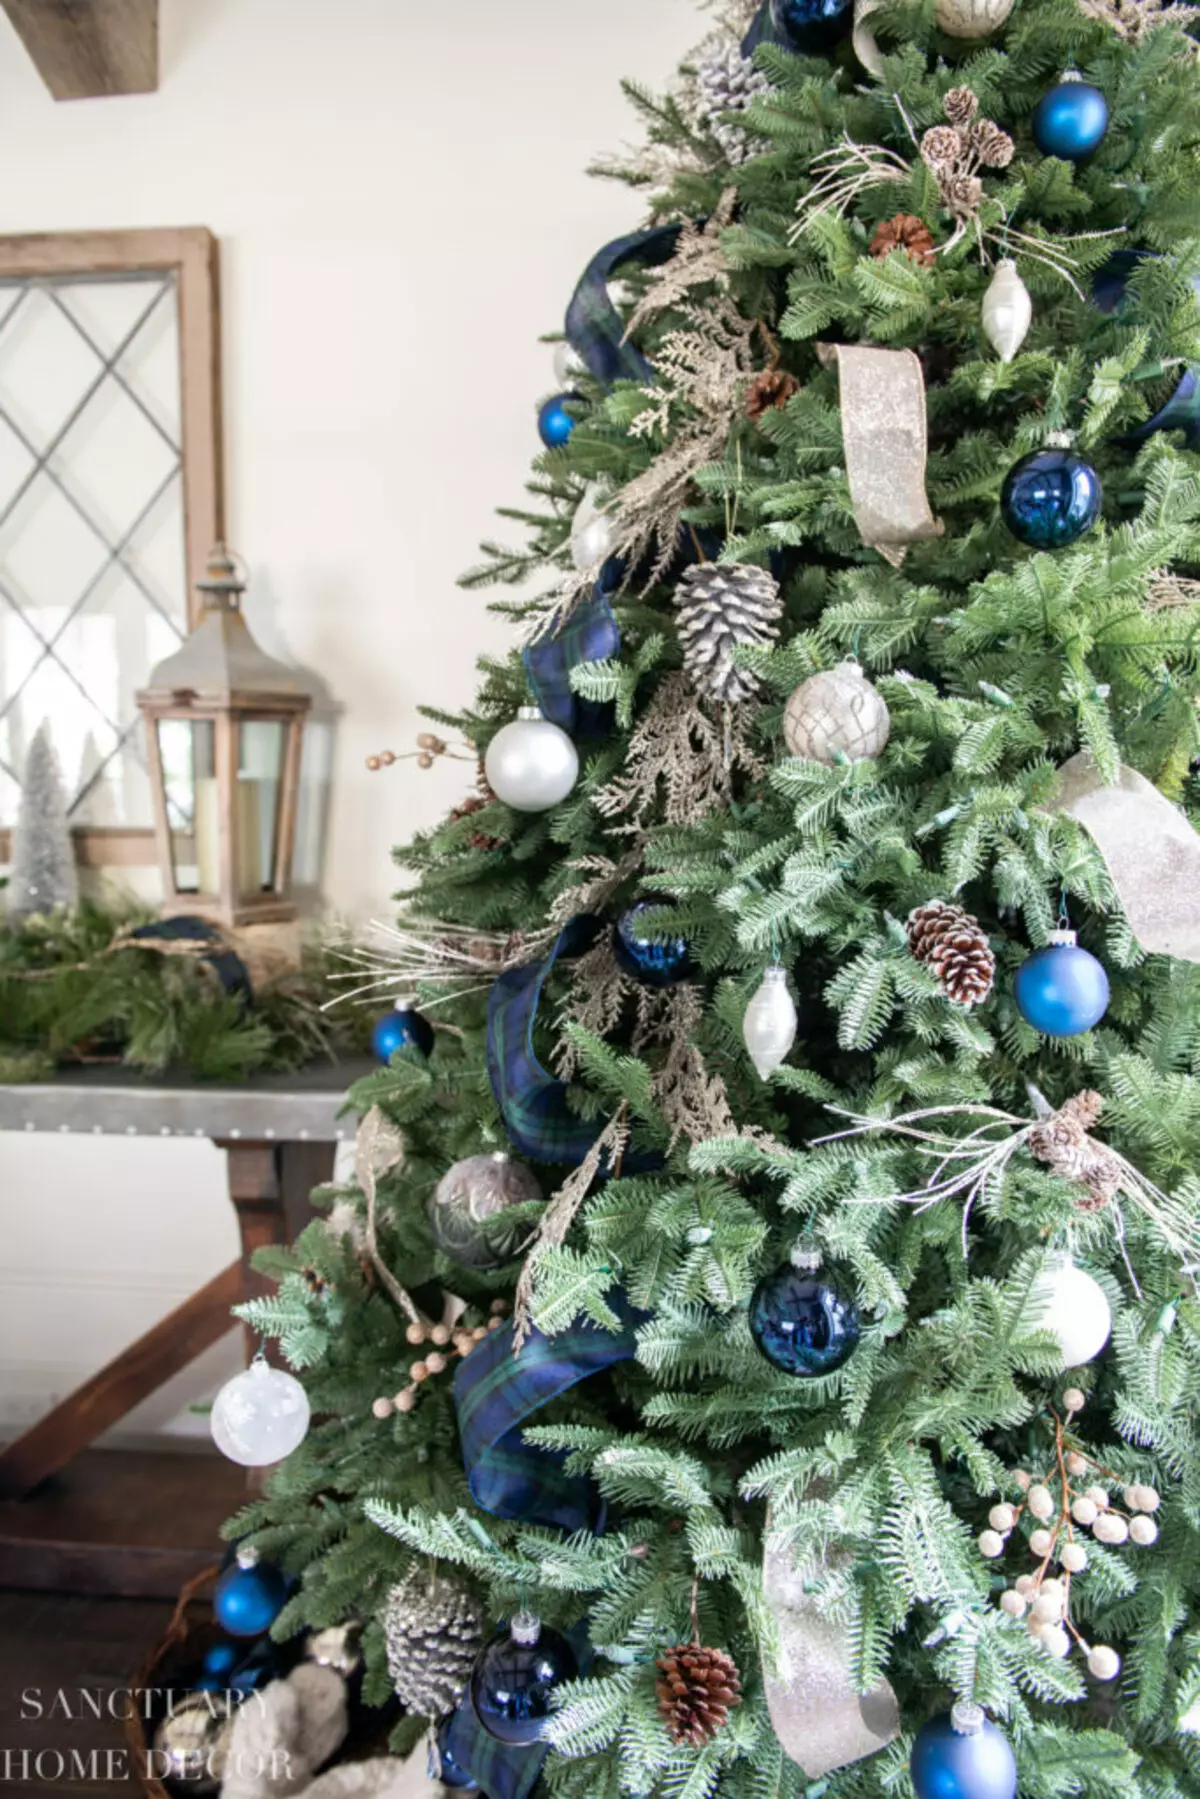 How to decorate the Christmas tree in blue-silver color? 30 photos How to dress up with balls and other decorations in blue and silver tones? 7627_11